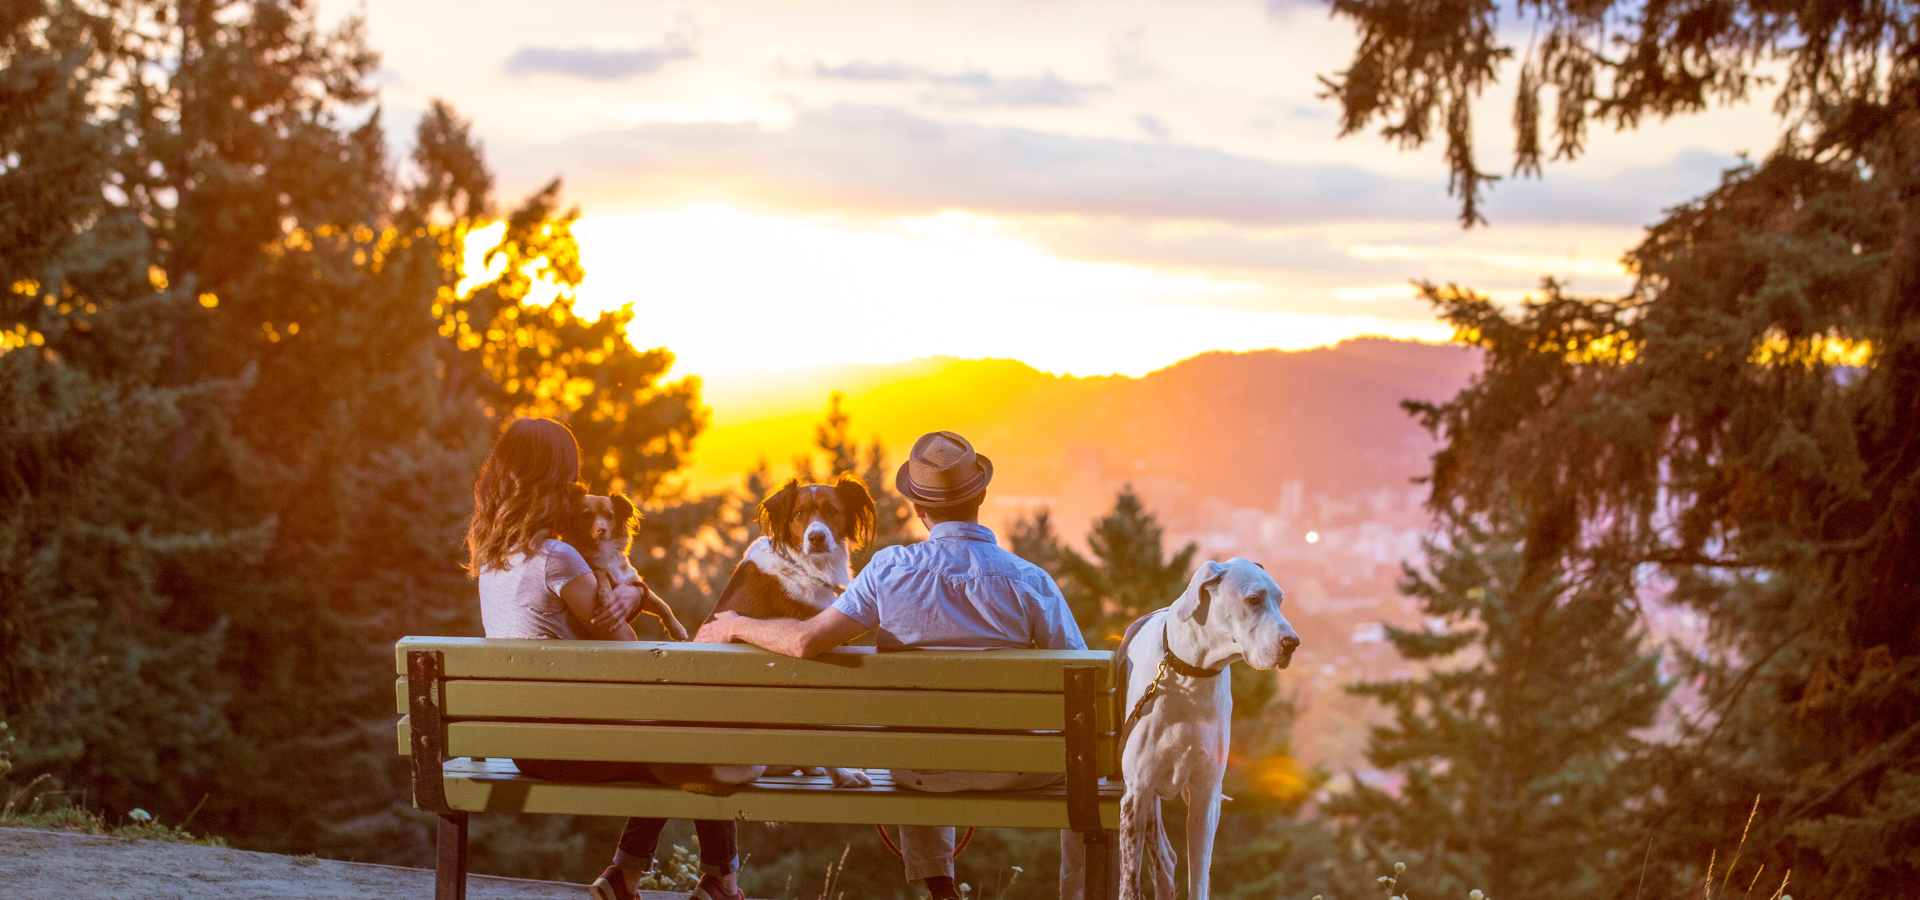 Humans and dogs, backs facing, gazing at the sunset over the mountains